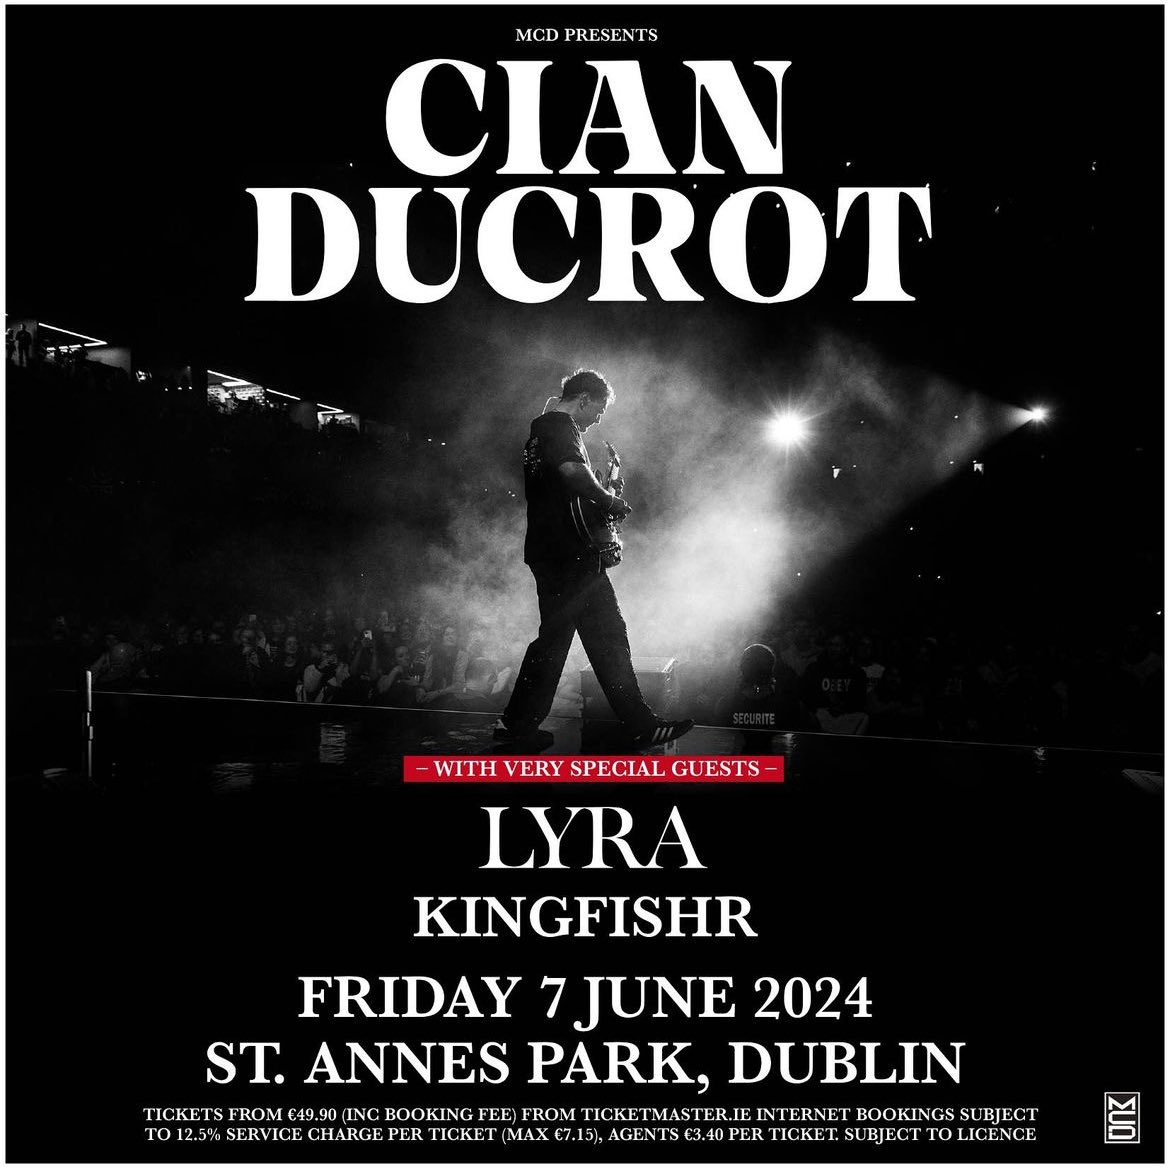 Dublin, I’m delighted to be bringing @thisislyra and @KingfishrBand with me to St. Annes Park this June 🤍 Might change the set list up a bit.. maybe even play some of the new stuff👀 It’s going to be wilddd. Tickets available now! cianducrot.com/live